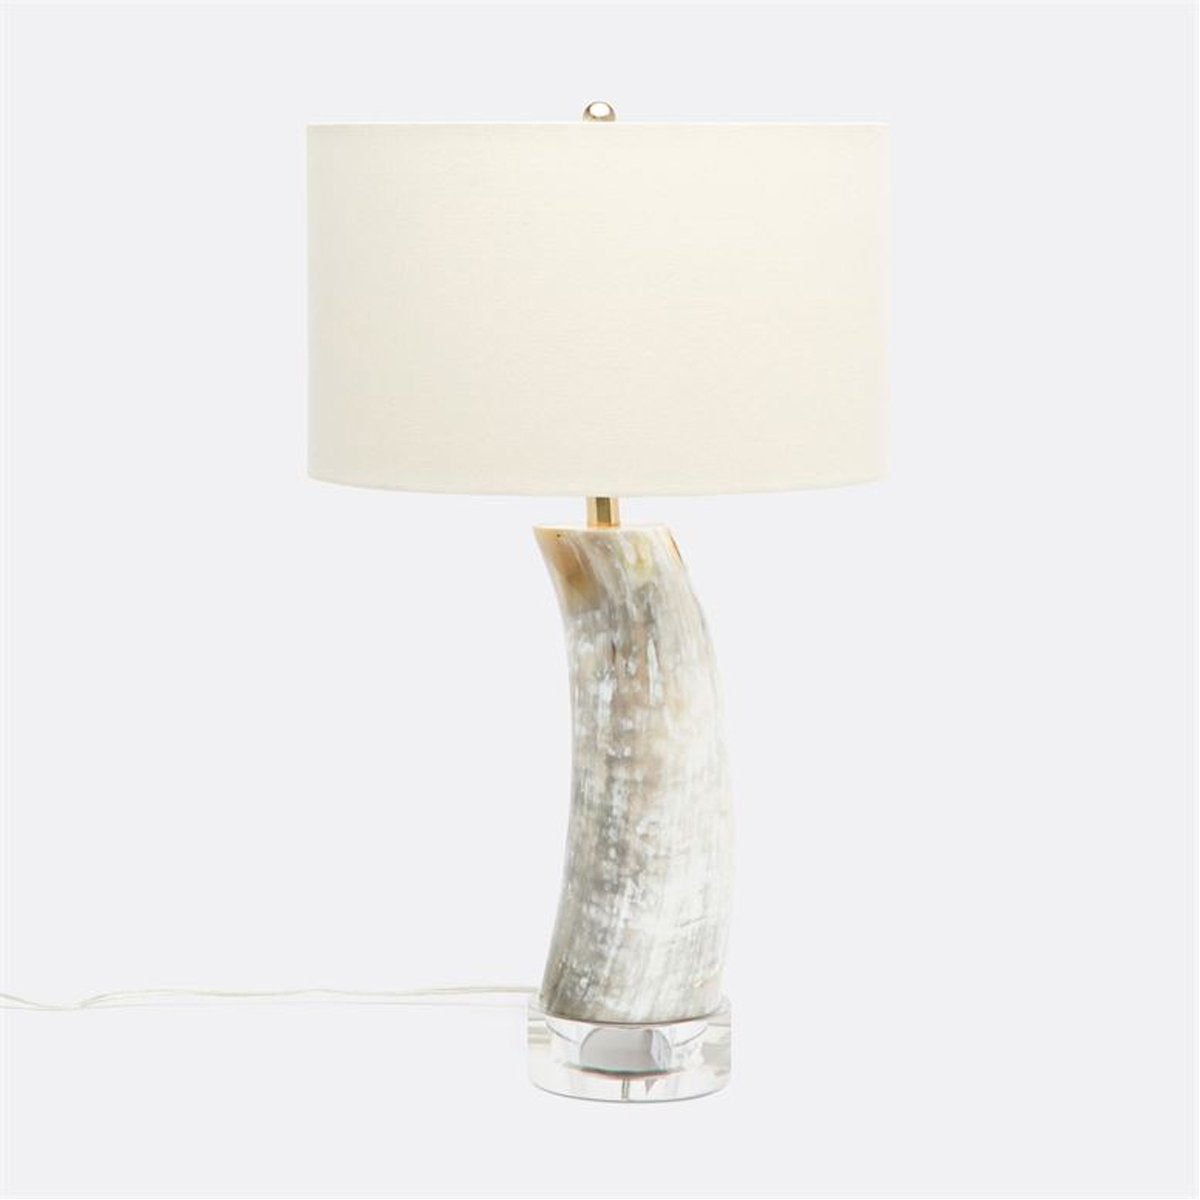 Made Goods Aiden Horn Table Lamp